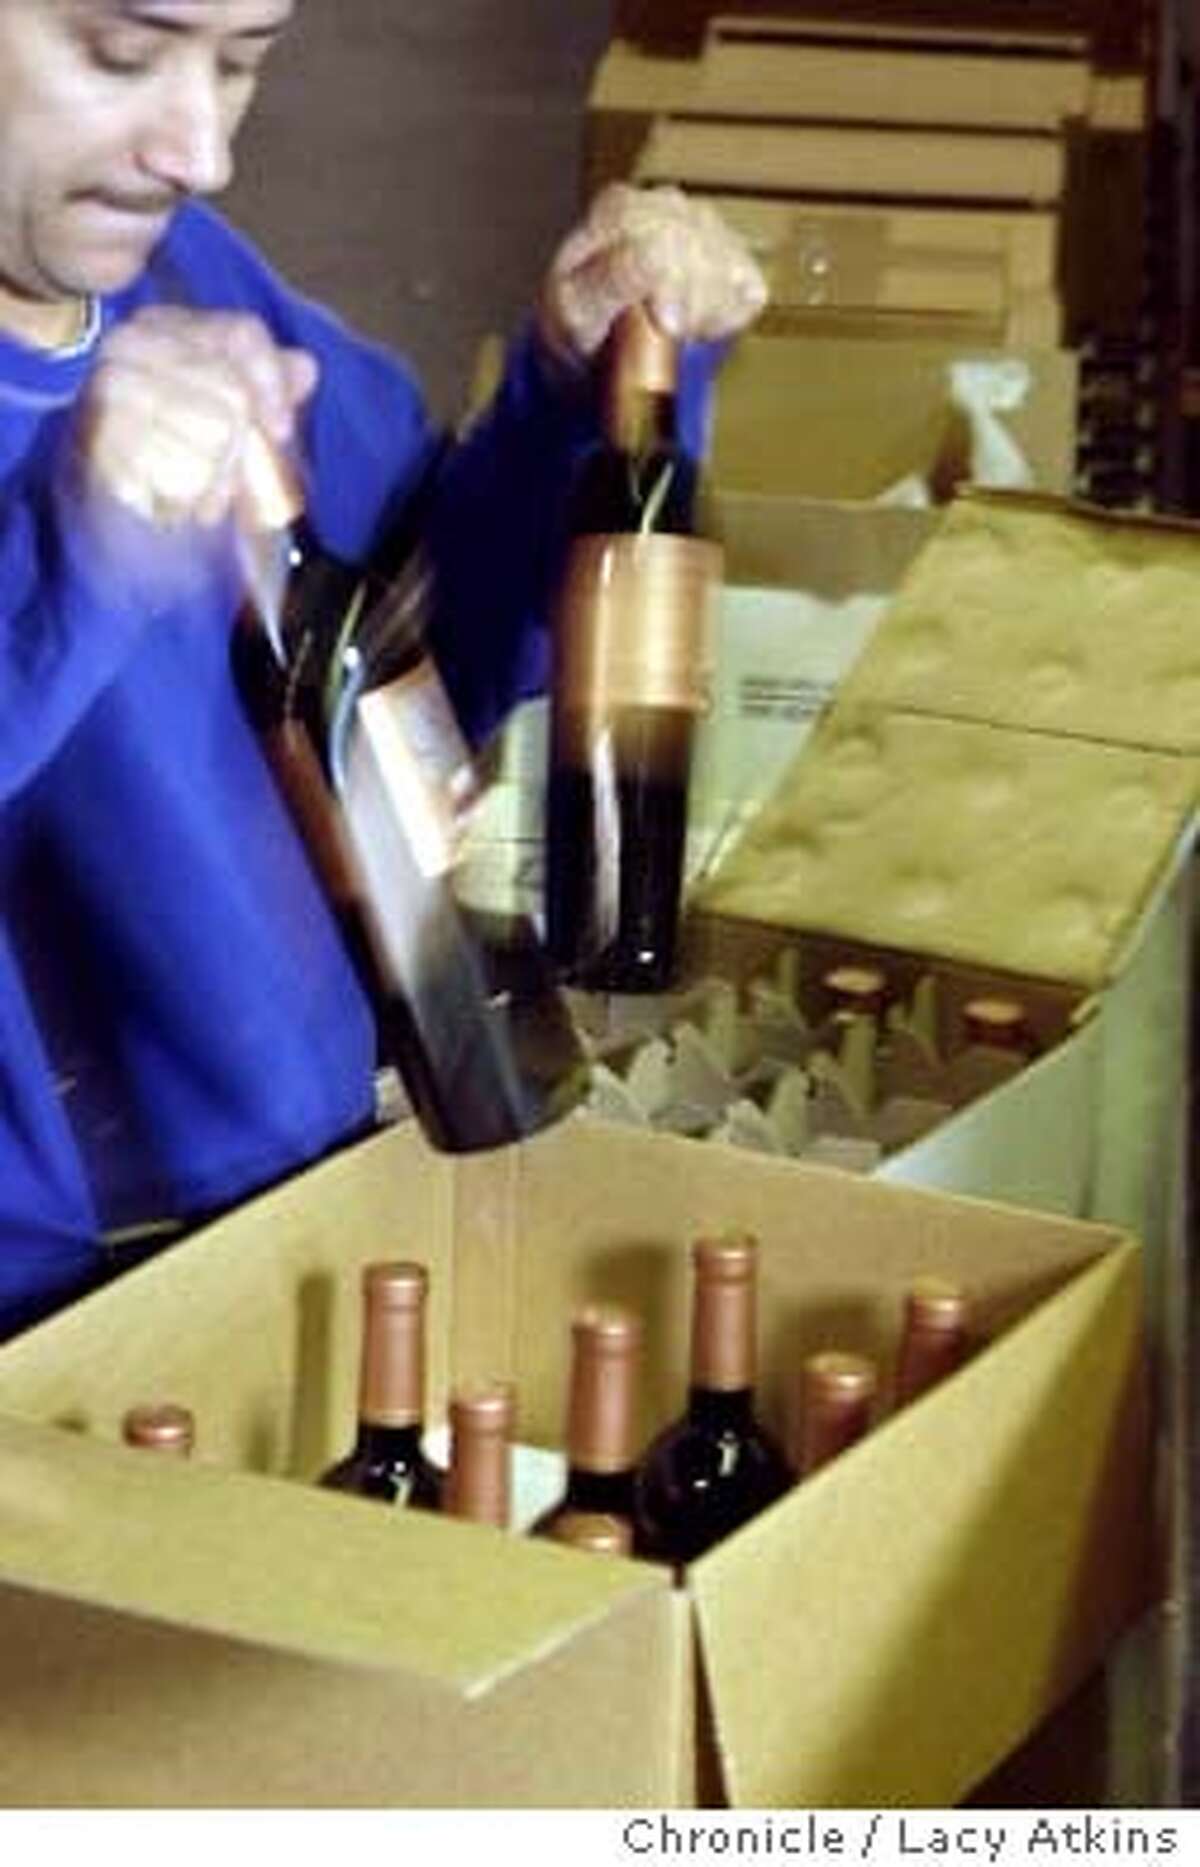 CLUBS_011_.jpg Ivan Cano packages bottles of wine for a wine club member shipment at the Aero Packing Company, Monday Jan.5, 2004, in American Canyon. AERO Packing Company assembles wine club shipments, Monday Jan. 5, 2004, in American Canyon. Lacy Atkins / The Chronicle ProductNameChronicle Ivan Cano of Aero Packing in American Canyon readies a shipment for wine club members wanting something special.